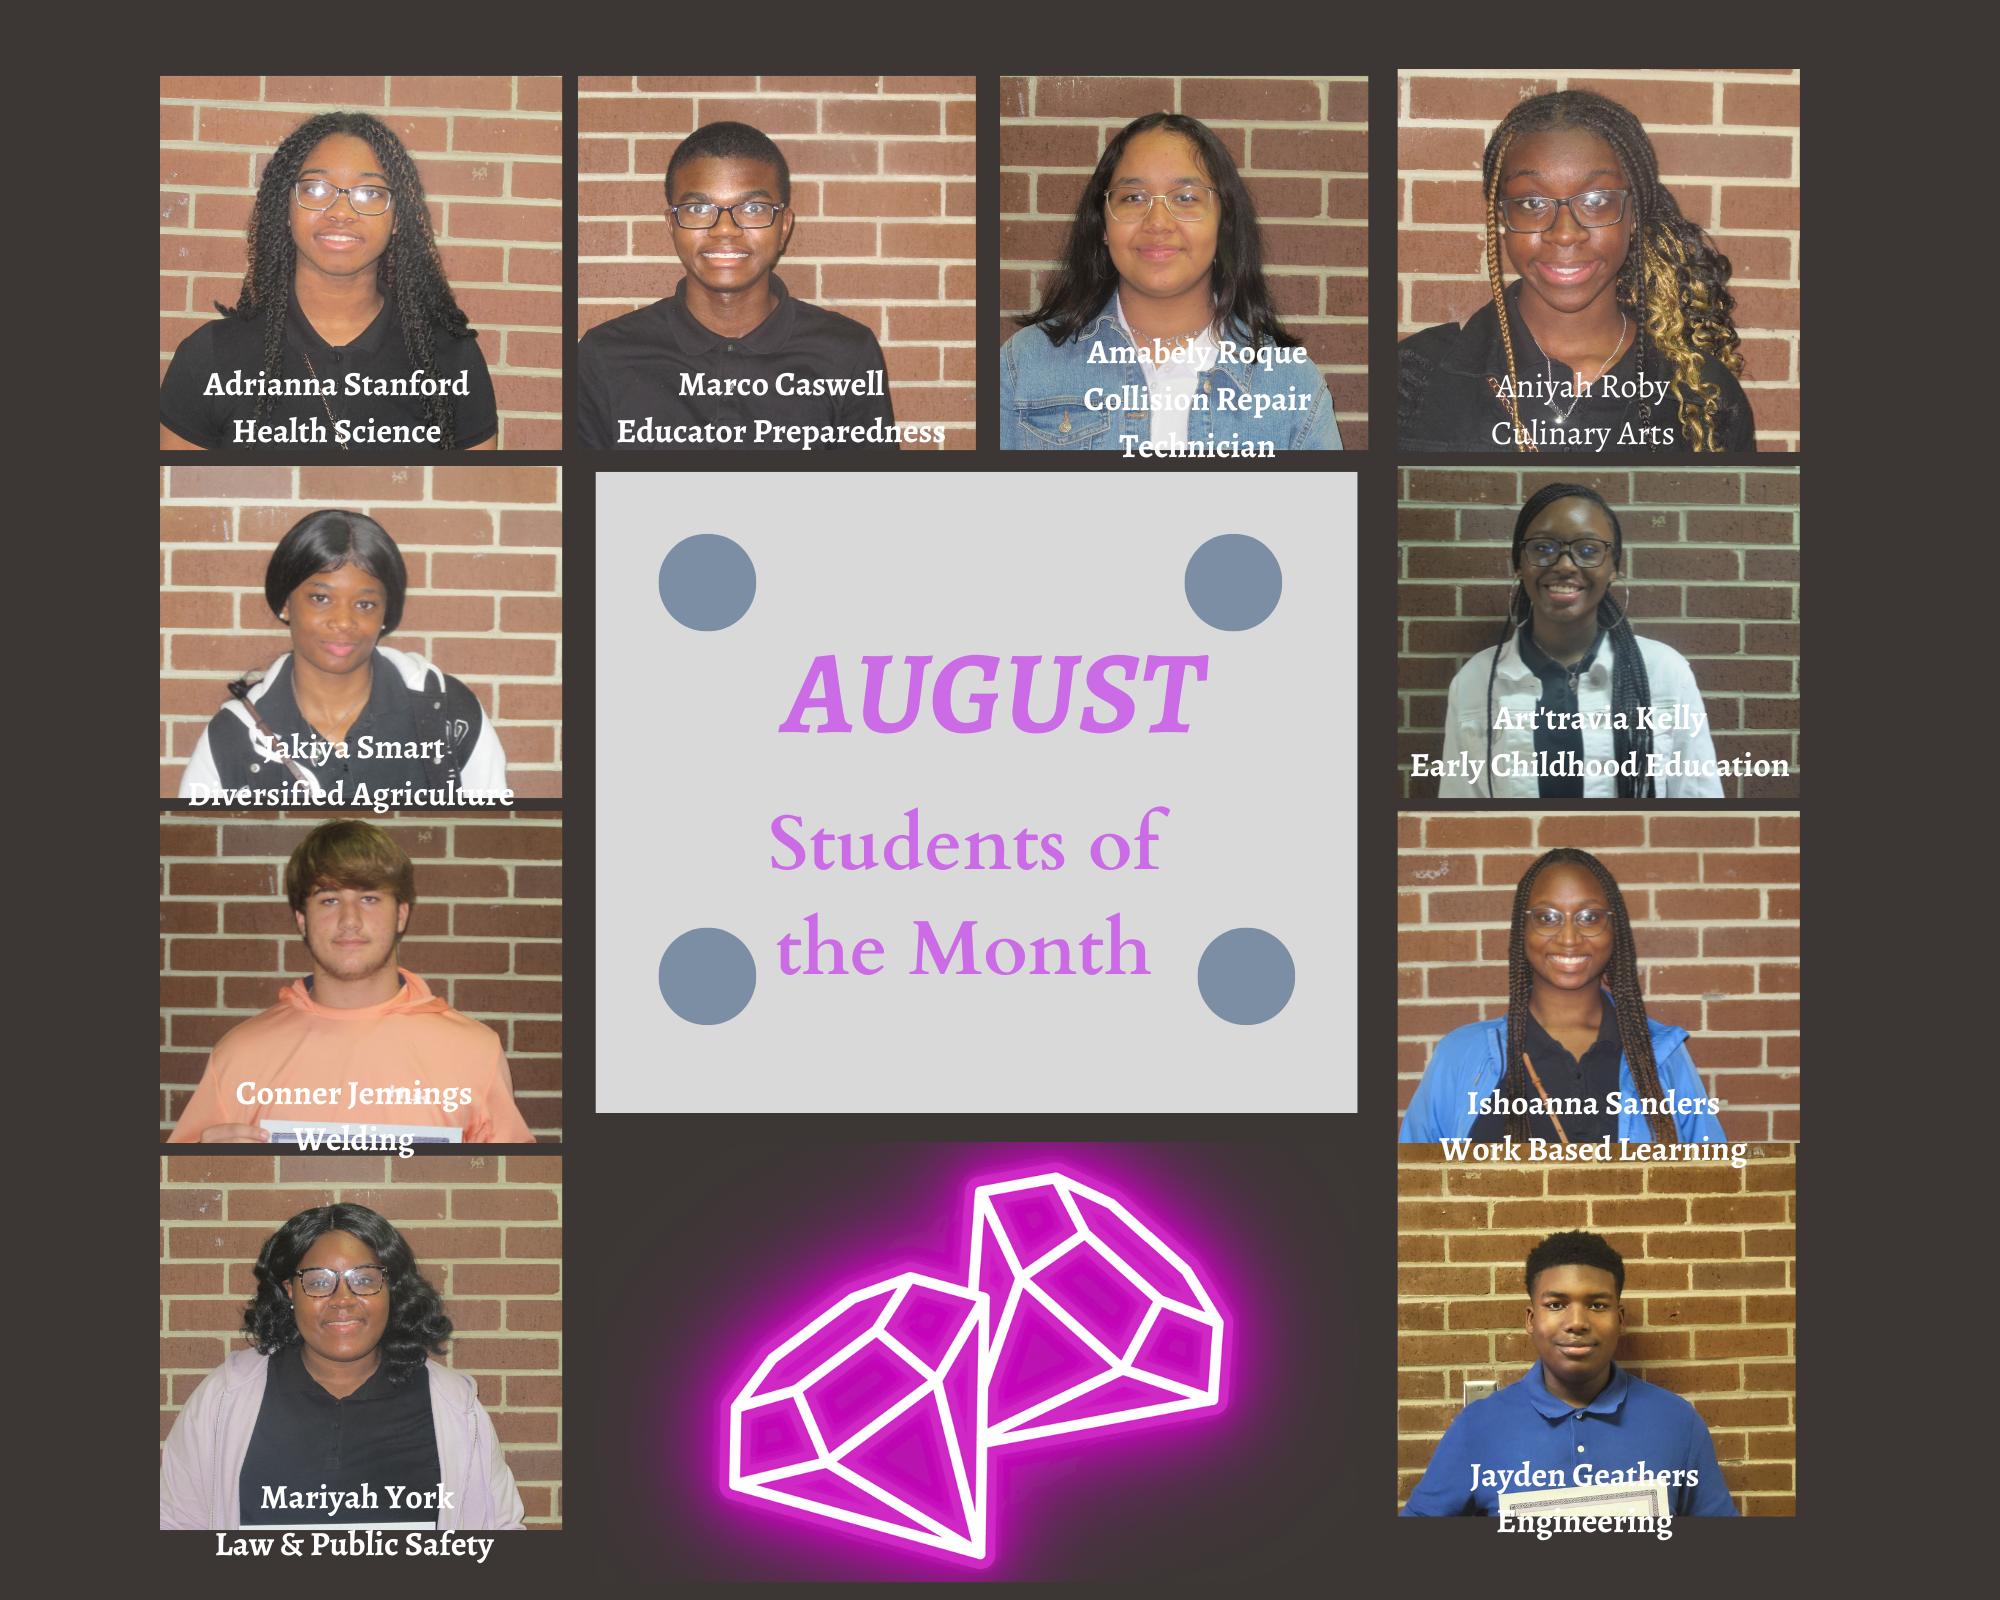 Greenville Technical Center's August Students of the Month